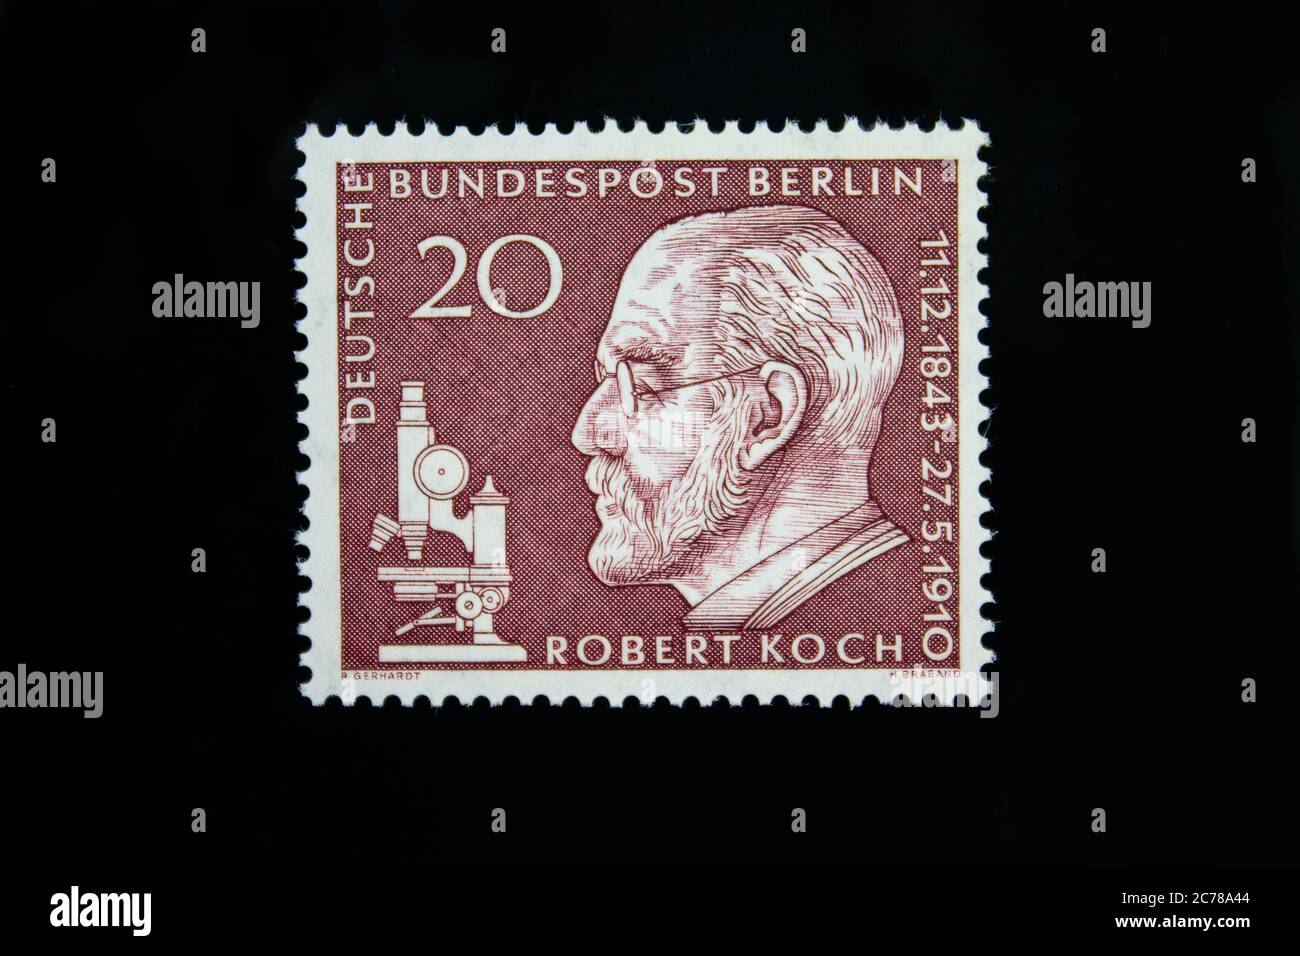 Postage stamp from FRG Berlin. 50th anniversary of Robert Koch's death. Printed May 27, 1960 Stock Photo